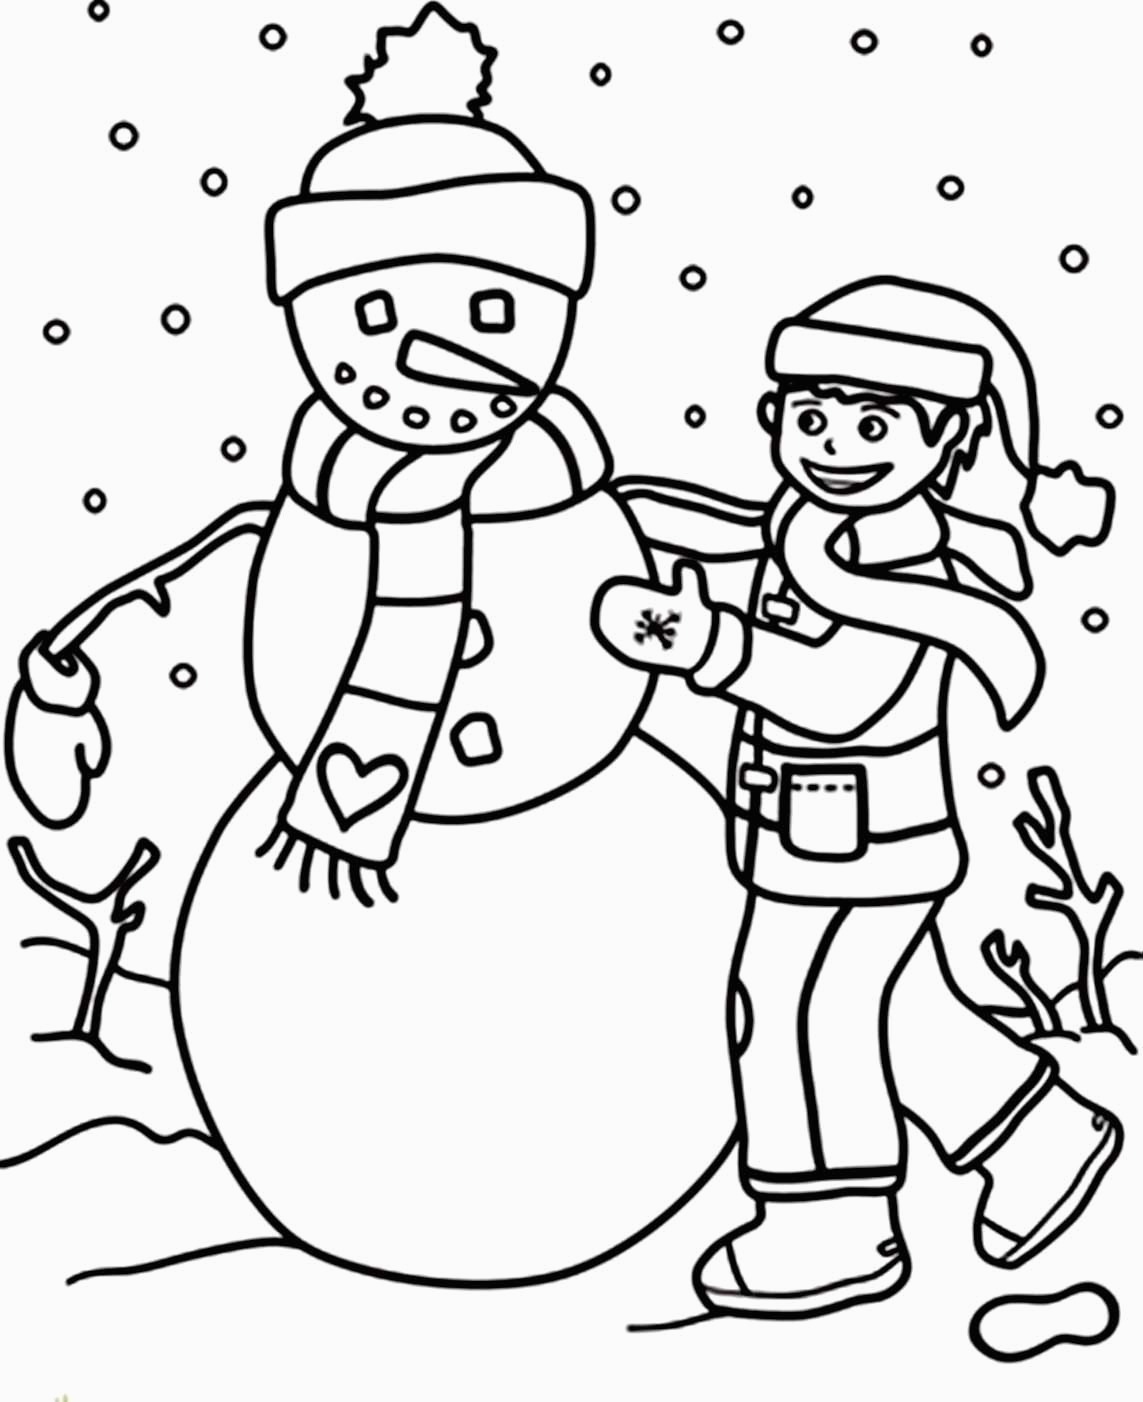 Snowmen Coloring Pages Coloring Book Olaf The Snowman Coloring Pages Cute Grig3 For Sheet